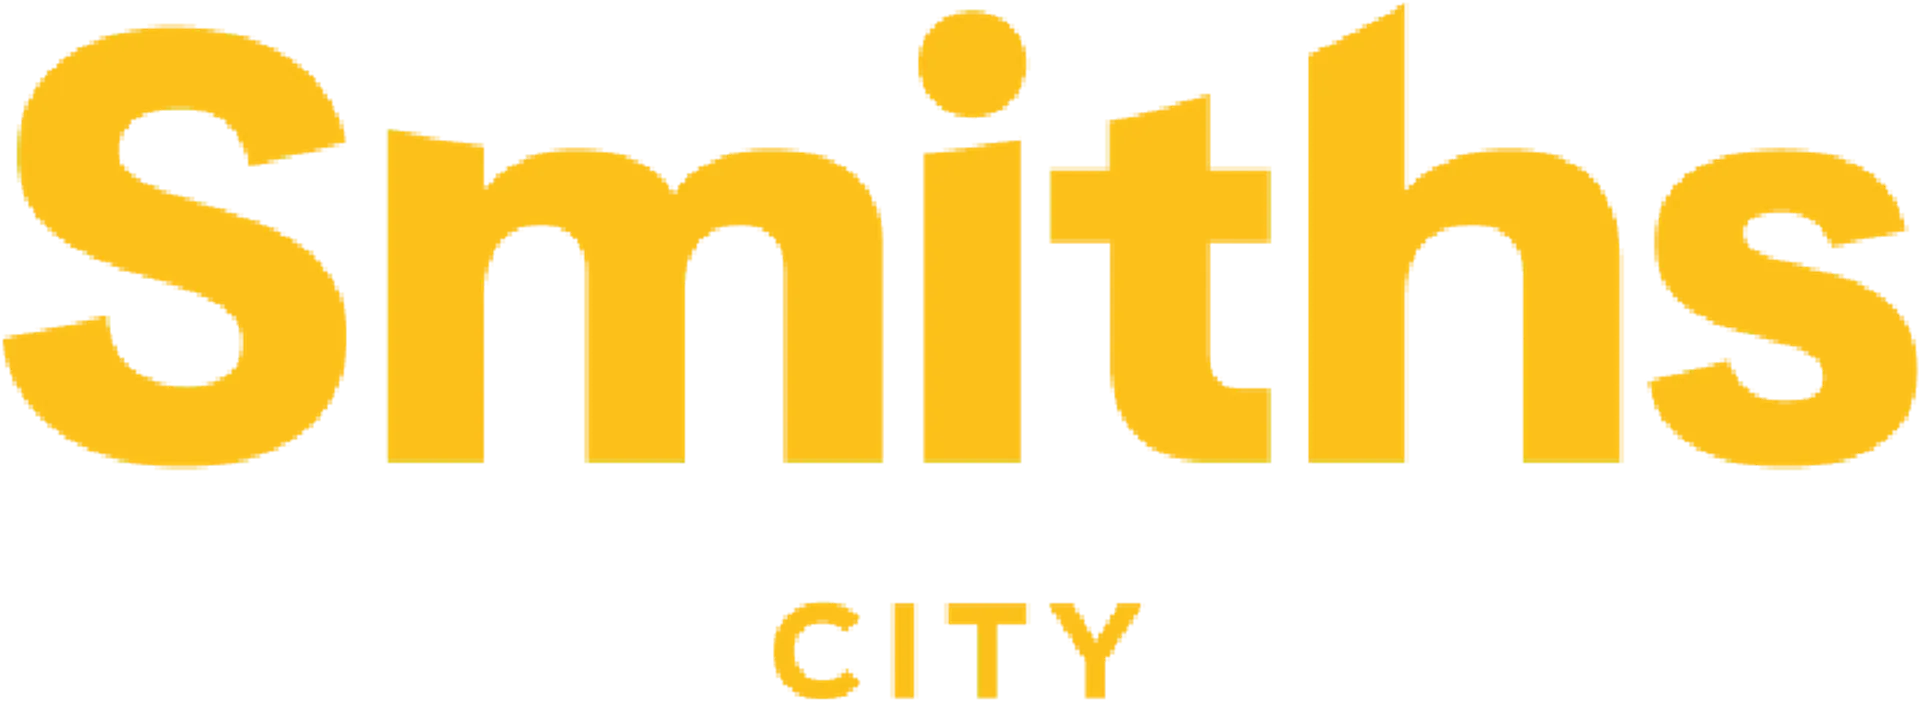 SMITHS CITY logo current weekly ad